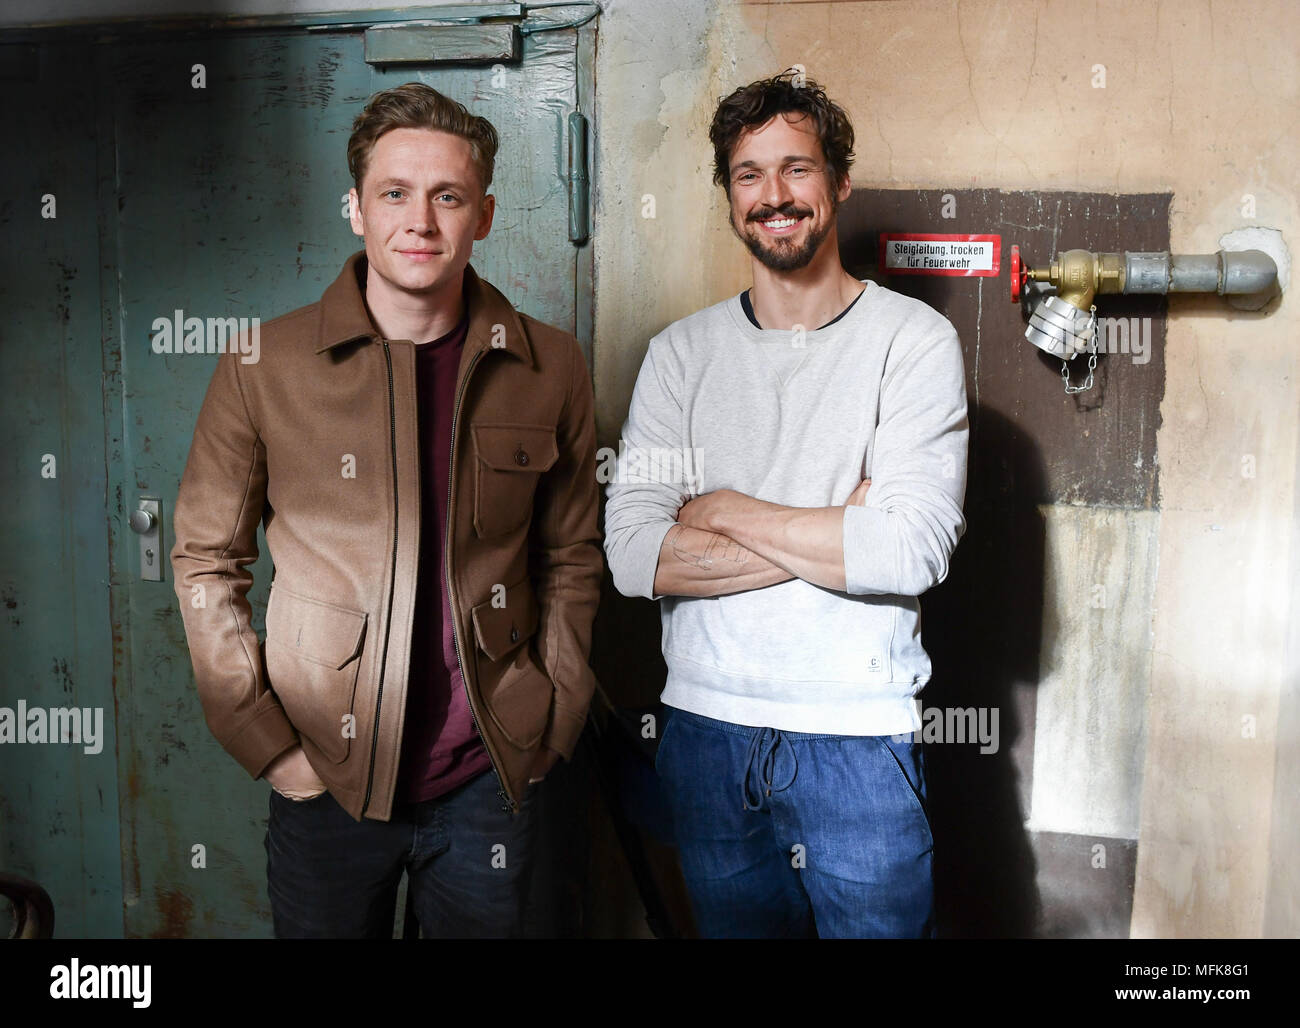 https://c8.alamy.com/comp/MFK8G1/25april-2018-germany-berlin-actor-matthias-schweighoefer-l-and-director-and-actor-florian-david-fitz-pictured-on-the-set-of-their-new-film-100-dinge-in-the-kreuzberg-area-of-berlin-photo-jens-kalaenedpa-zentralbilddpa-MFK8G1.jpg